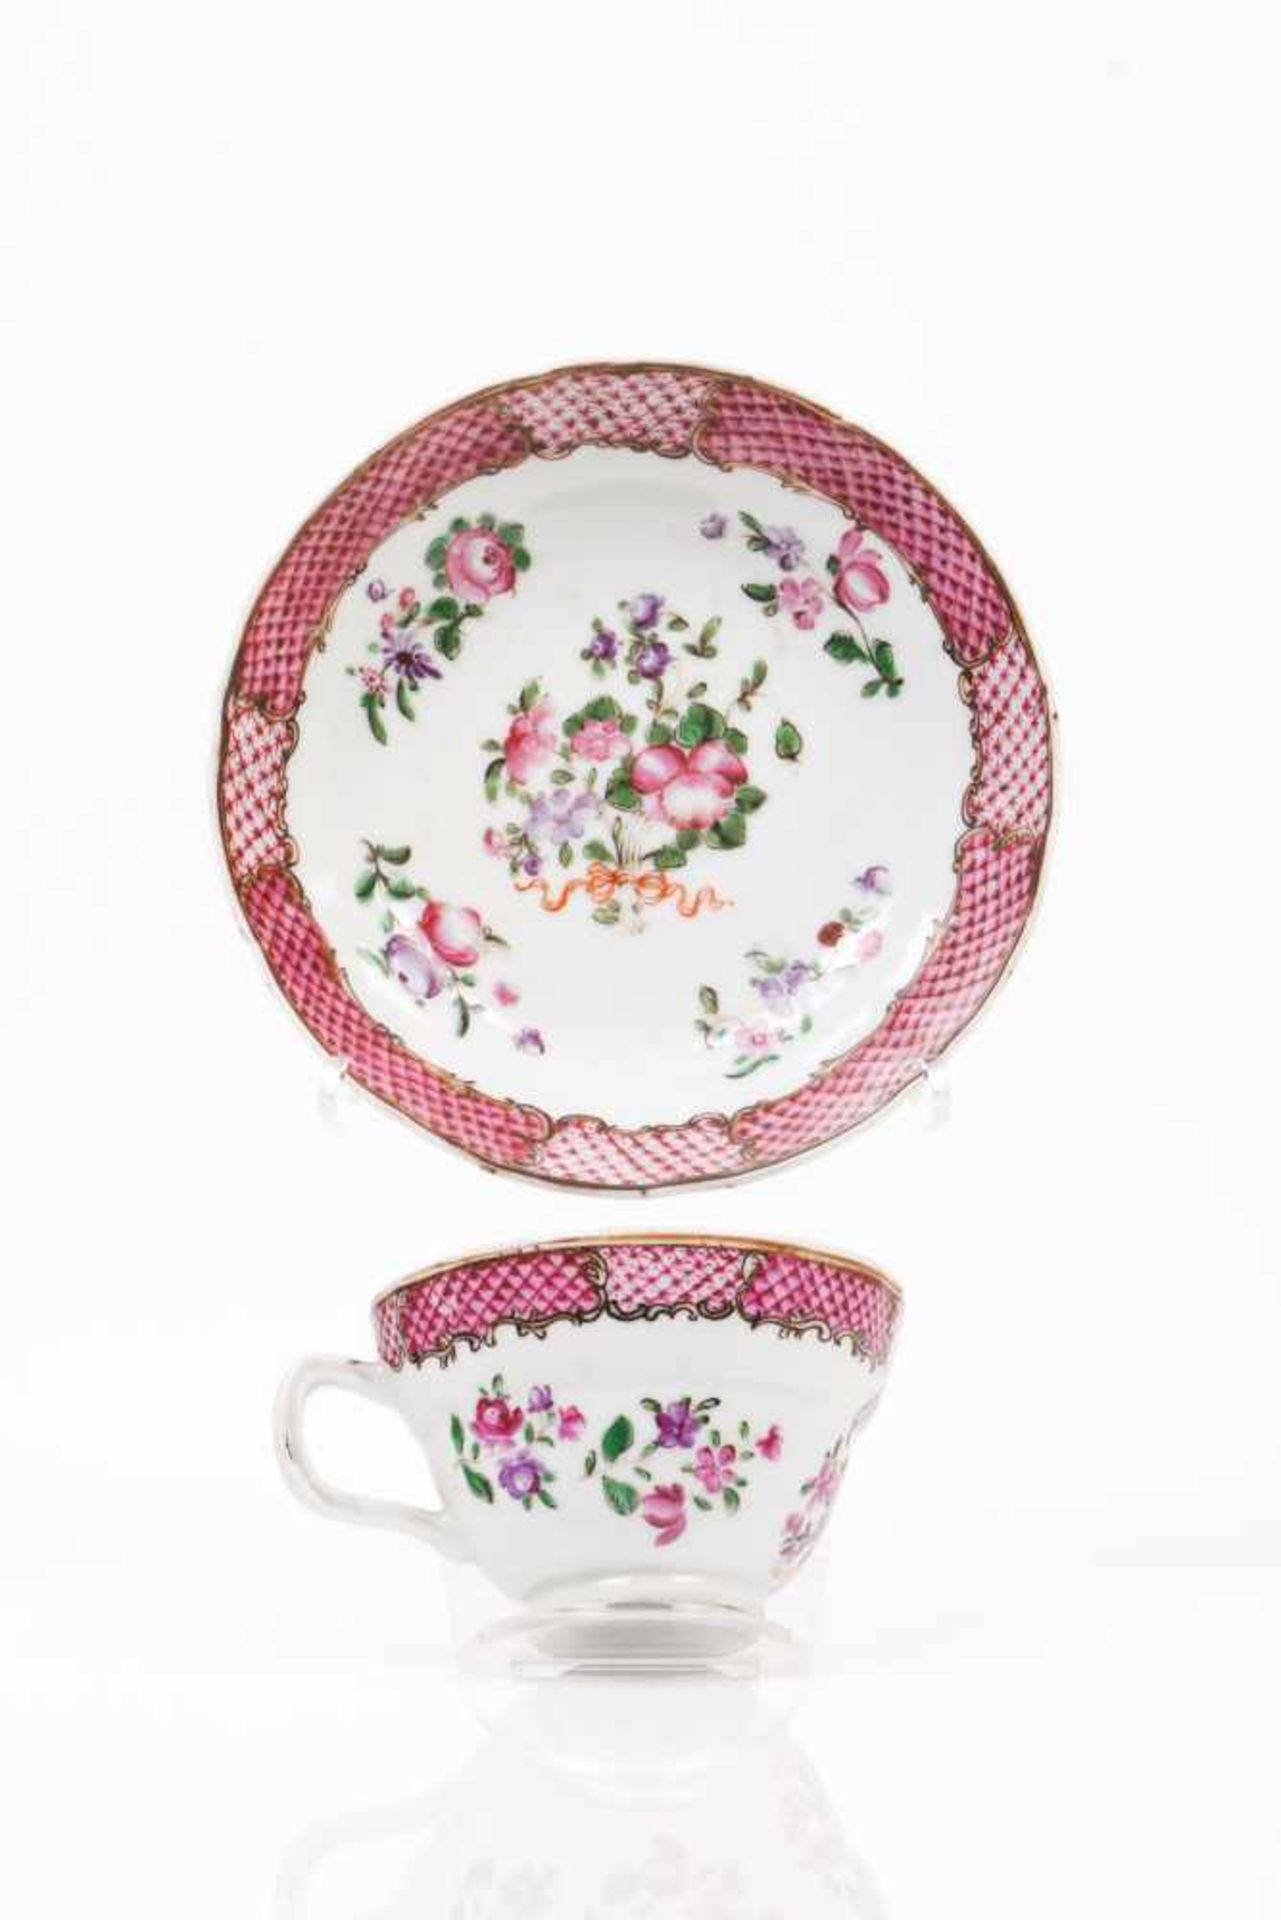 A cup and saucerChinese export porcelainPolychrome Famille Rose decoration depicting flowers and